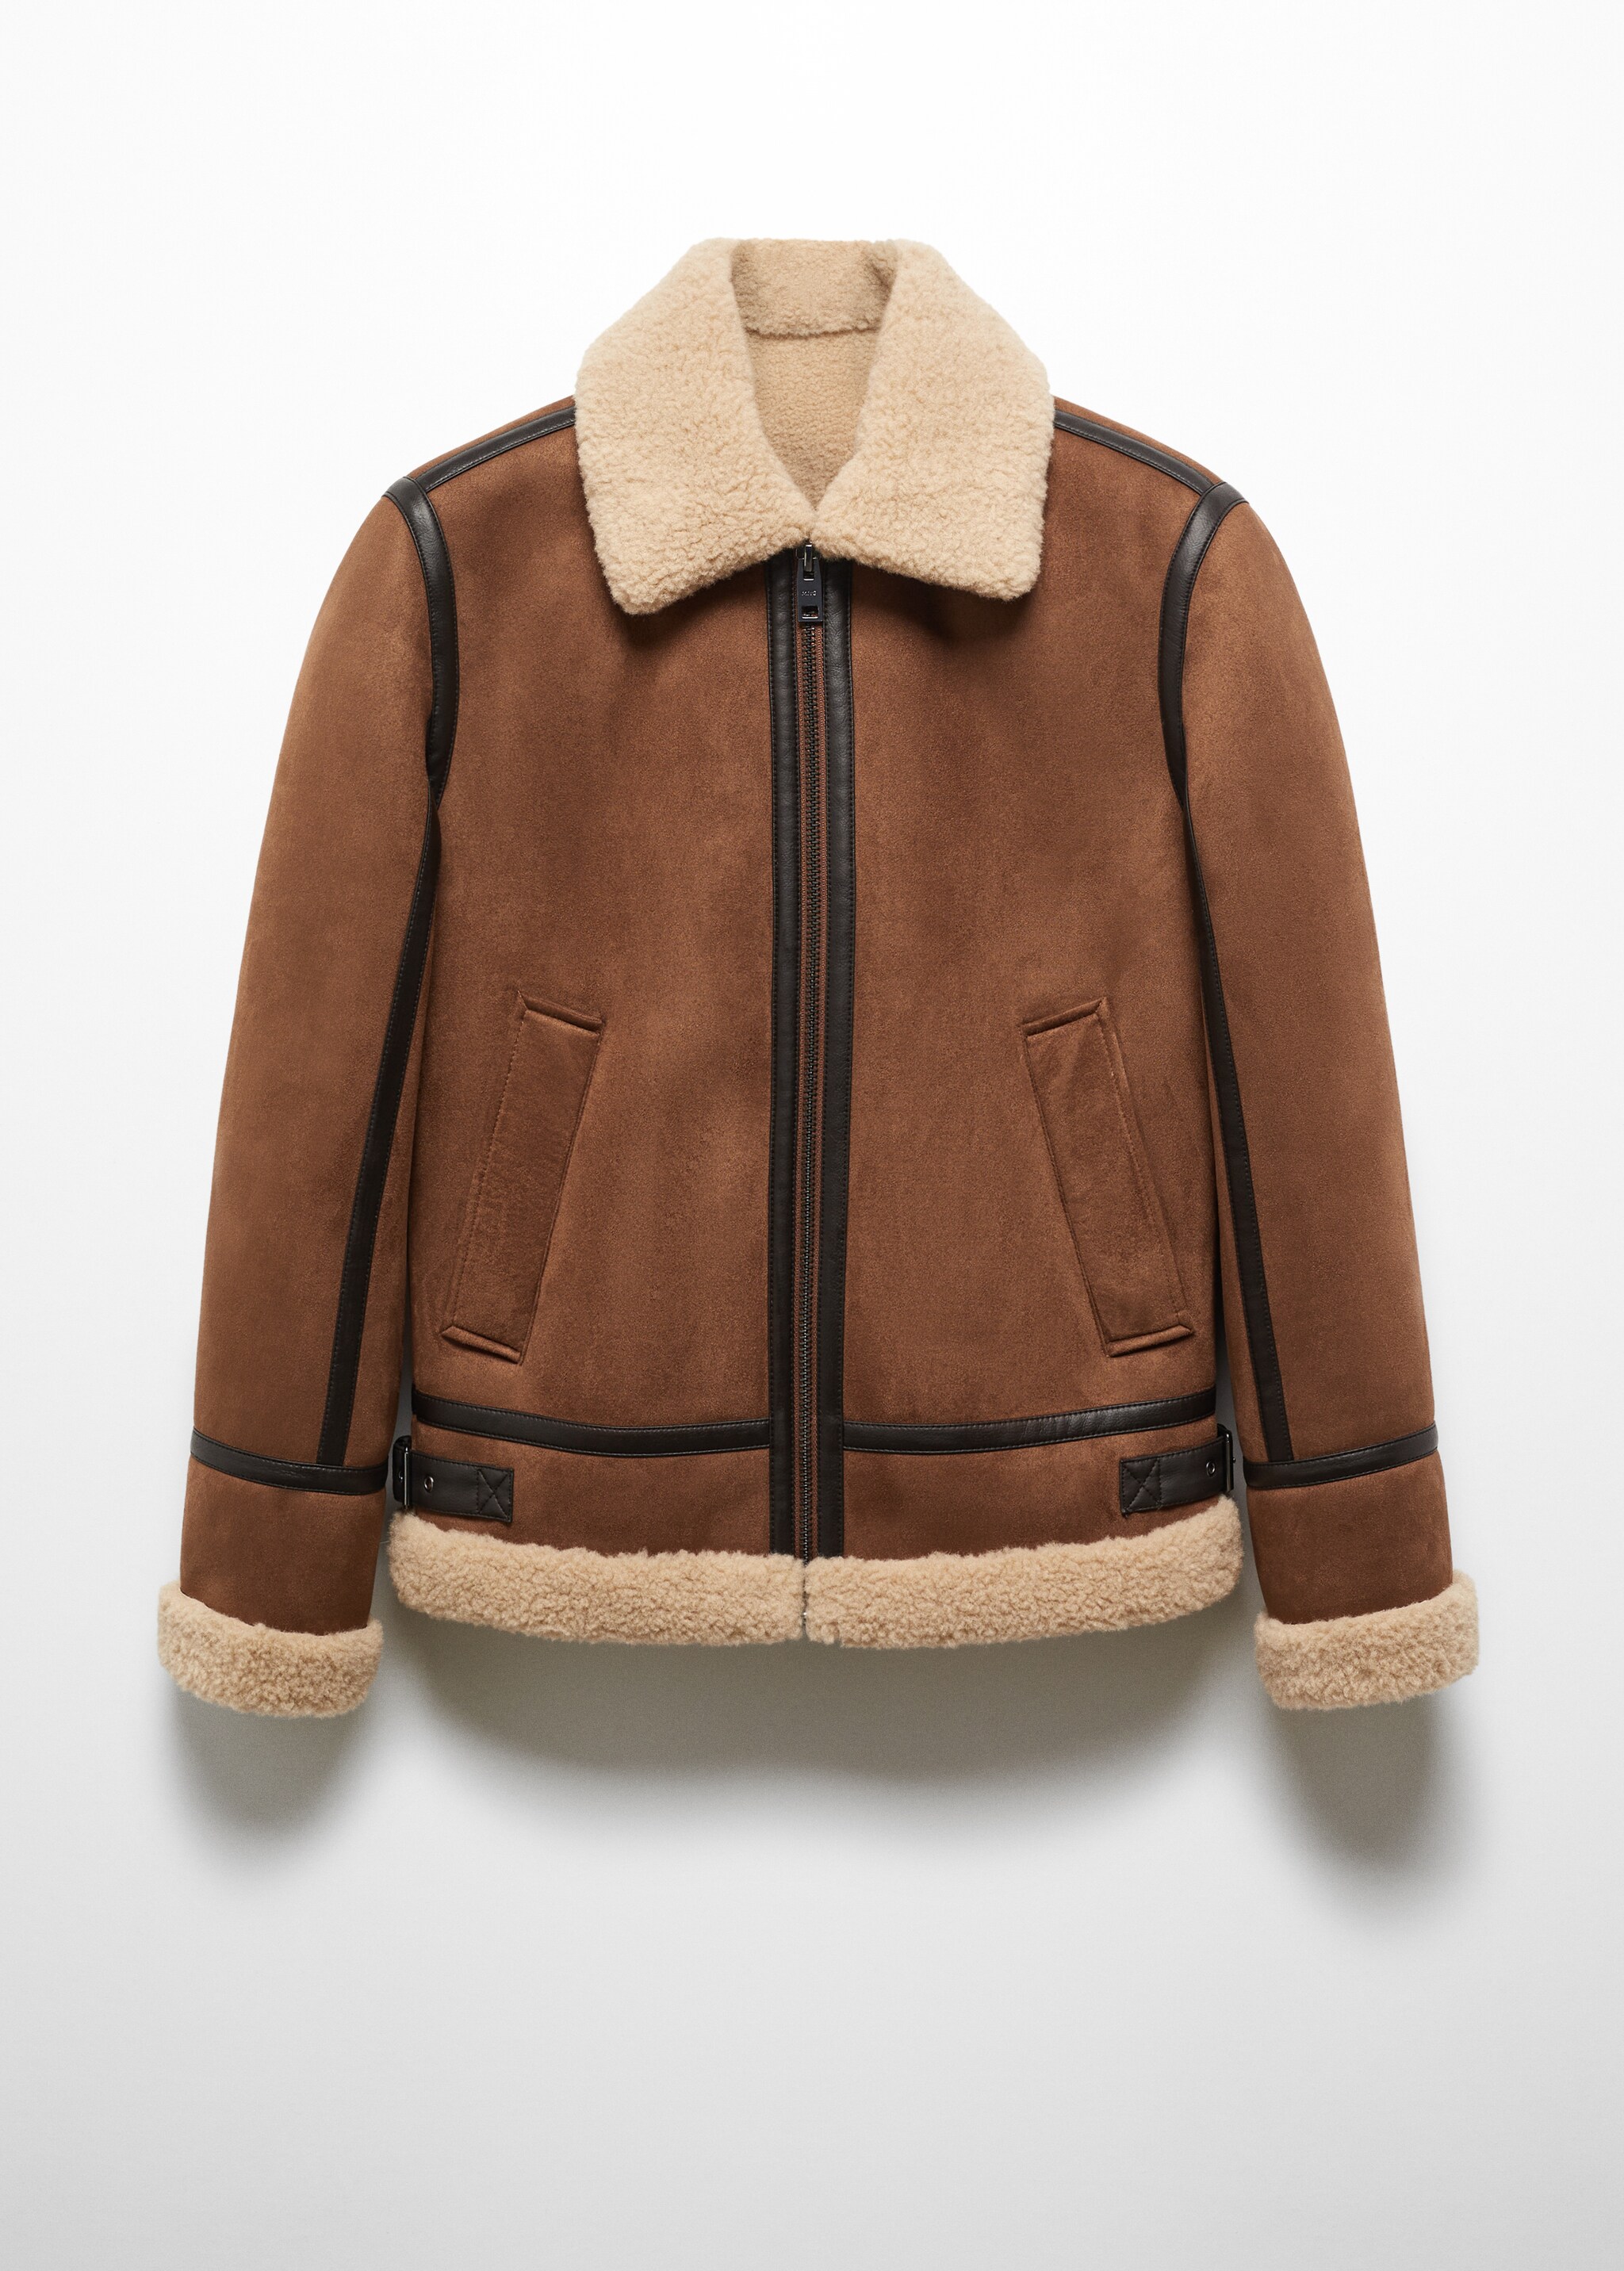 Shearling-lined jacket - Article without model